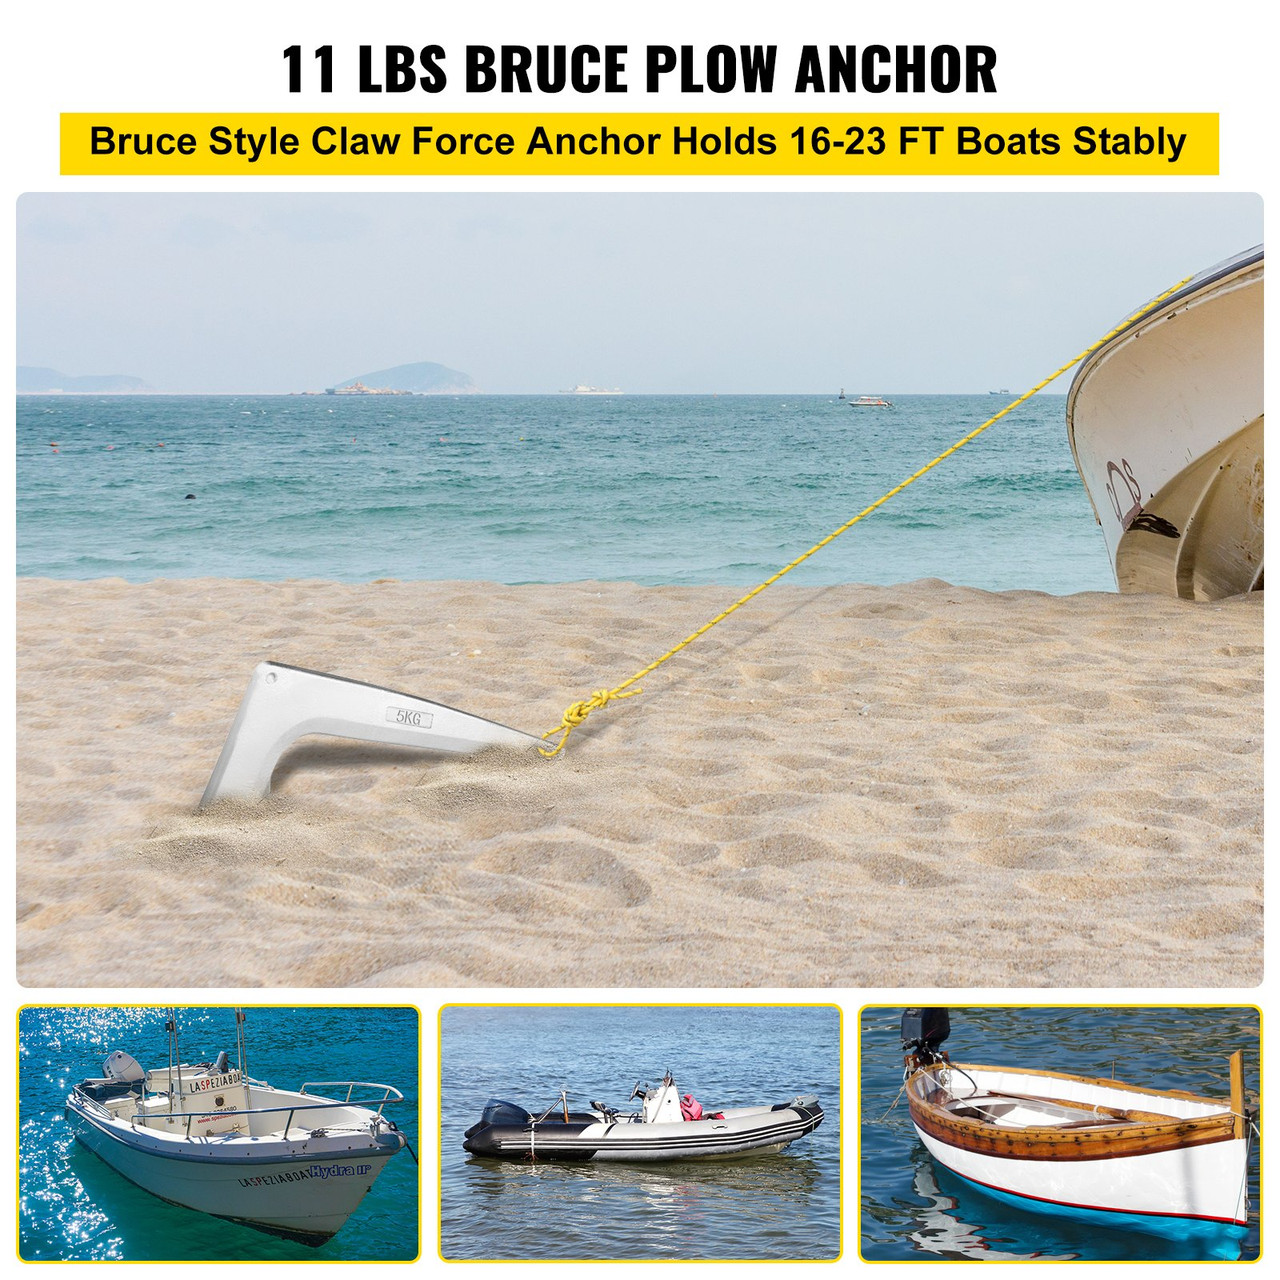 Bruce Claw Anchor 11 lb Boat Anchor, Galvanized Steel Boat Anchor, 5 kg Marine Anchor with One Anchor Shackle, Heavy Duty Boat Anchor for Small Boat Yacht Mooring on The Beach